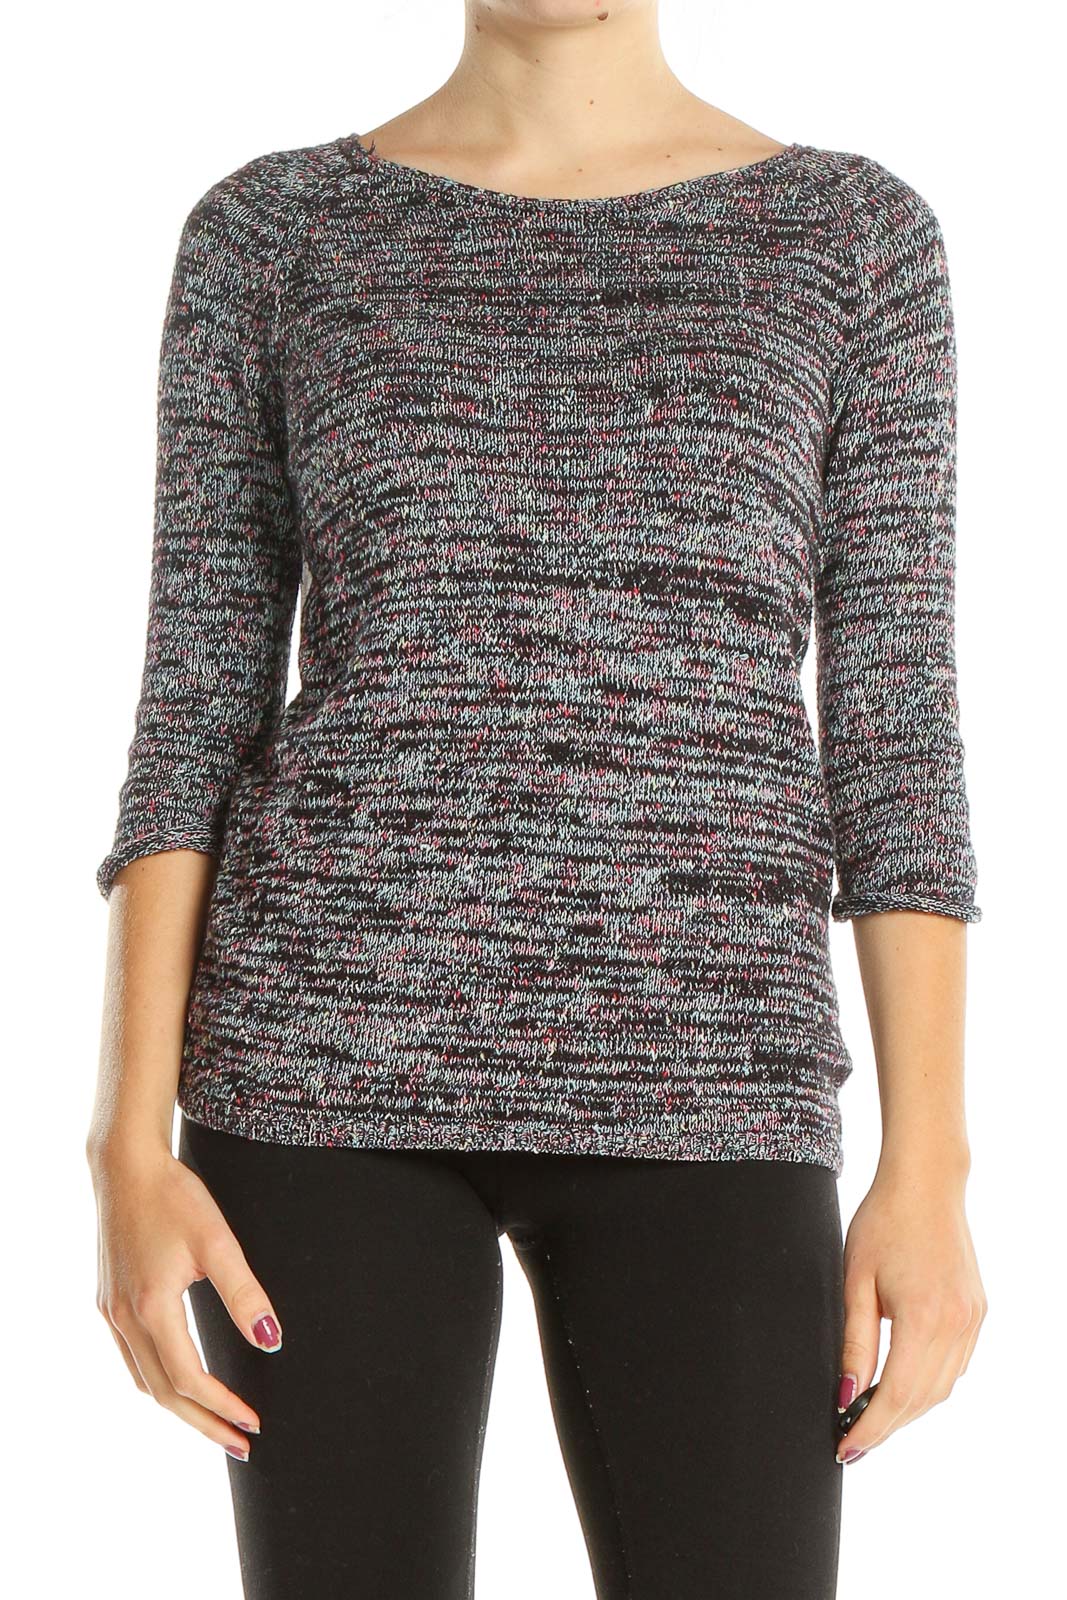 Gray Multicolor Textured Knitted Top Front